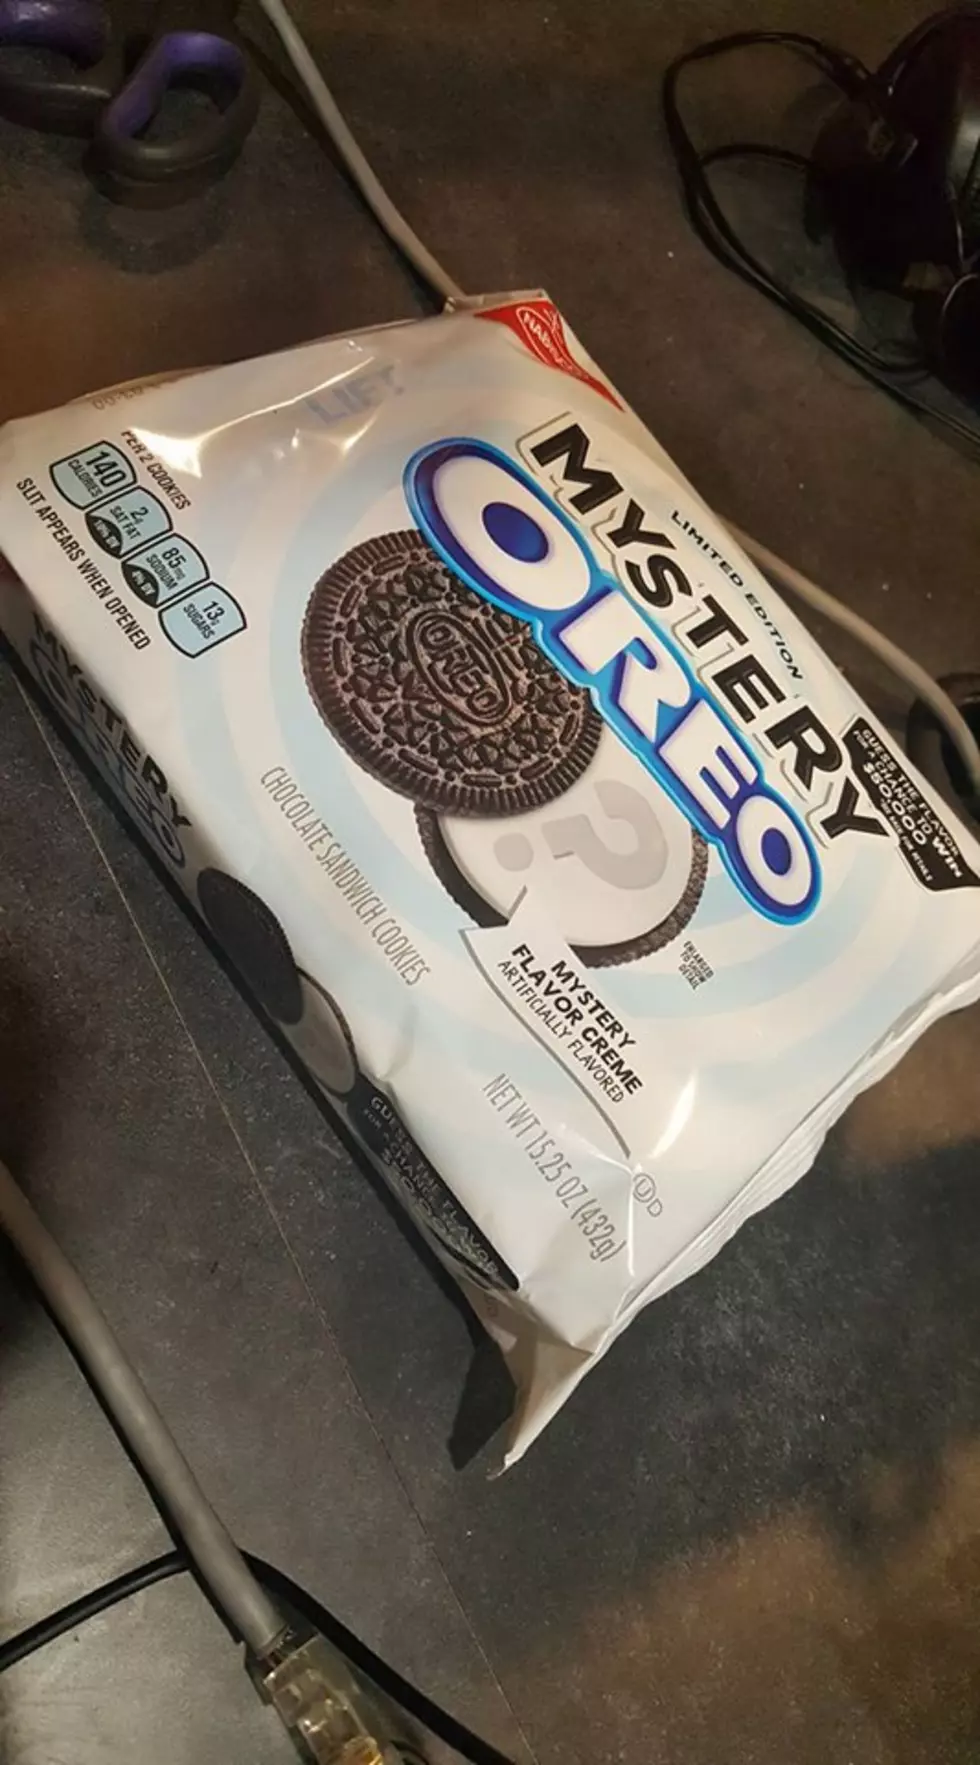 OREO Coming Out With Another Mystery Flavor